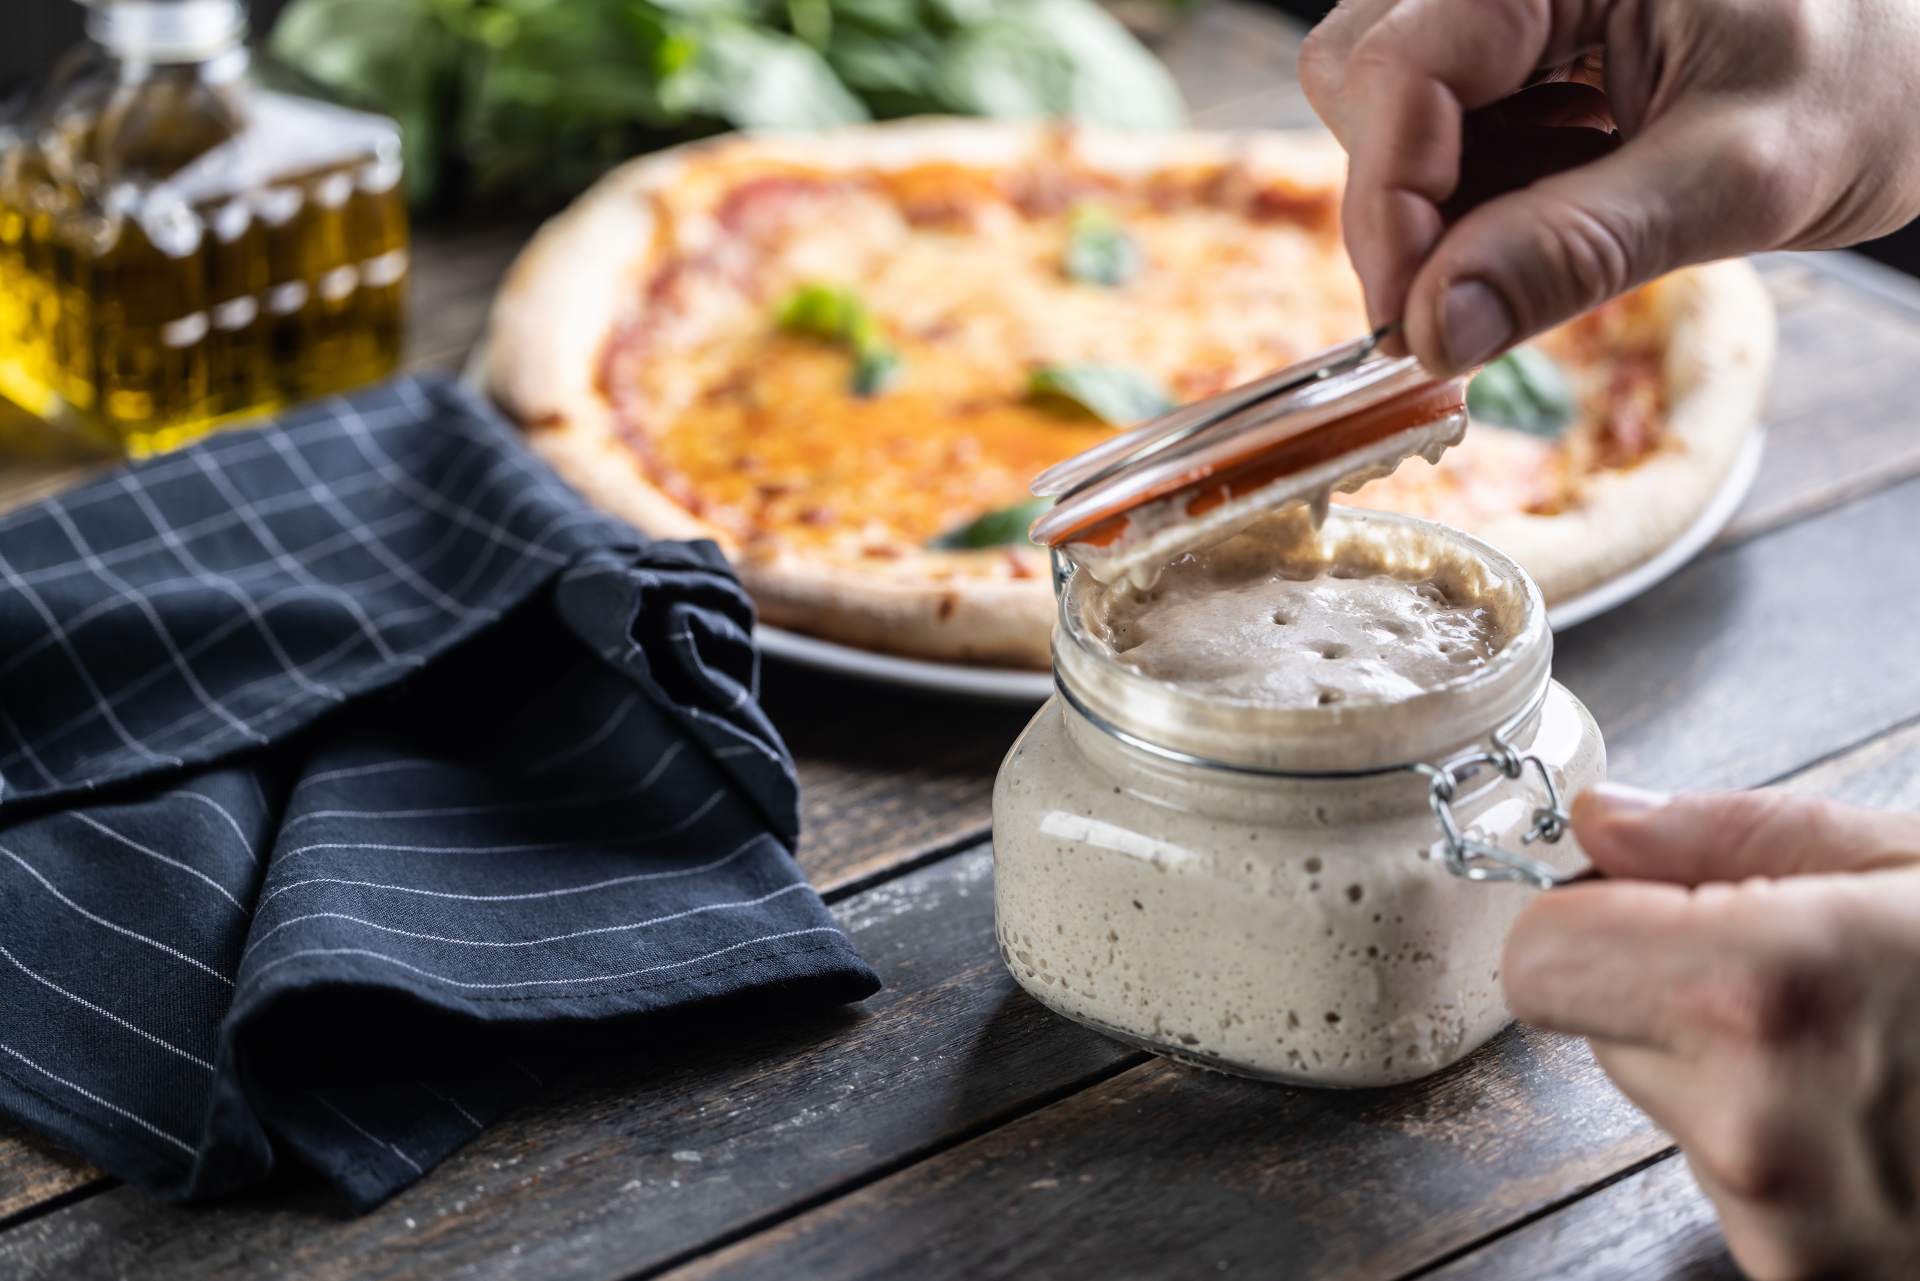 Sourdough starter in a glass jar on a table with a cooked cheese pizza with basil in the background.